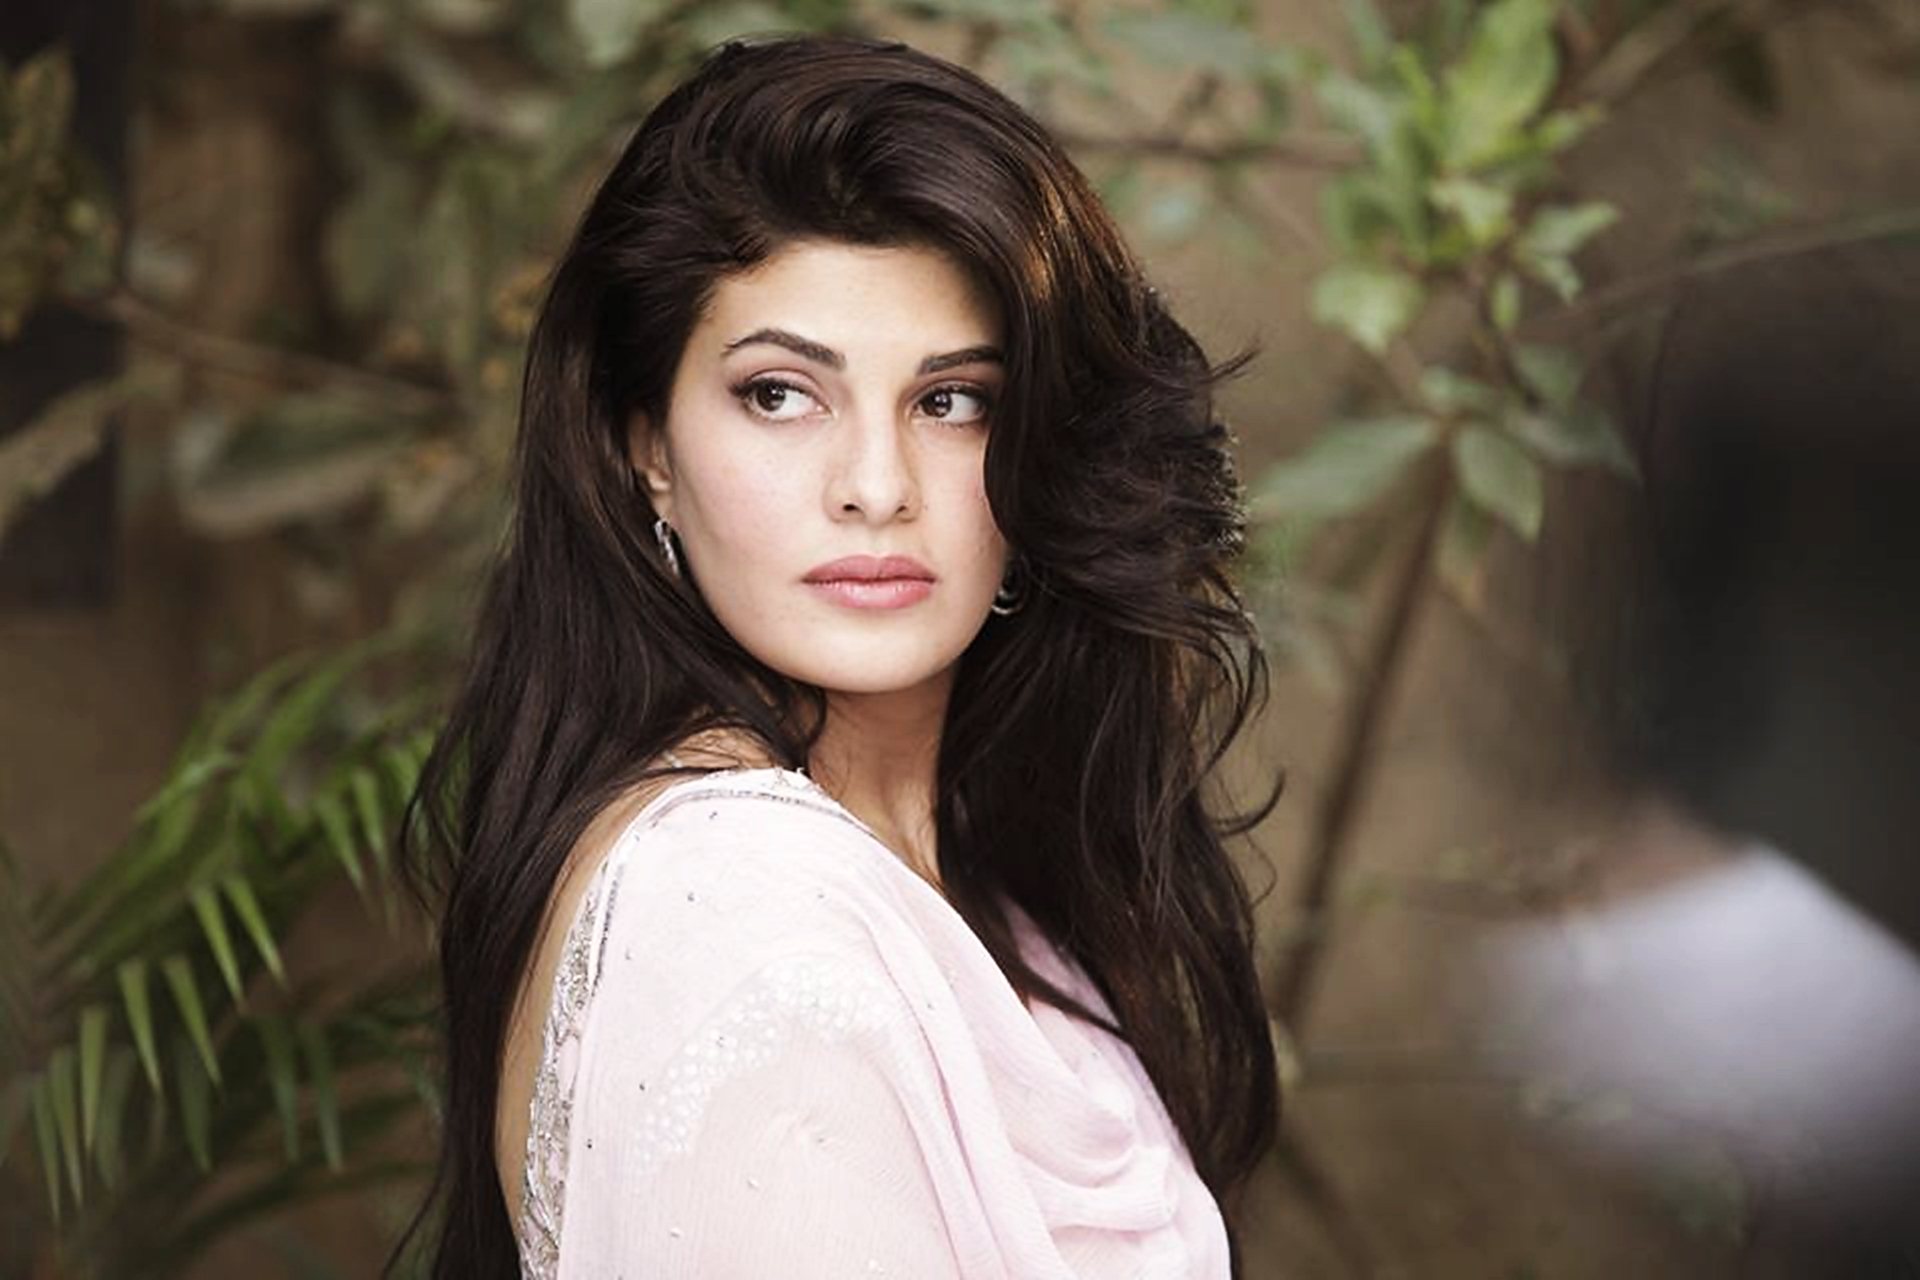 Jacqueline Fernandez Upcoming Movies 2017 With Release Date 01